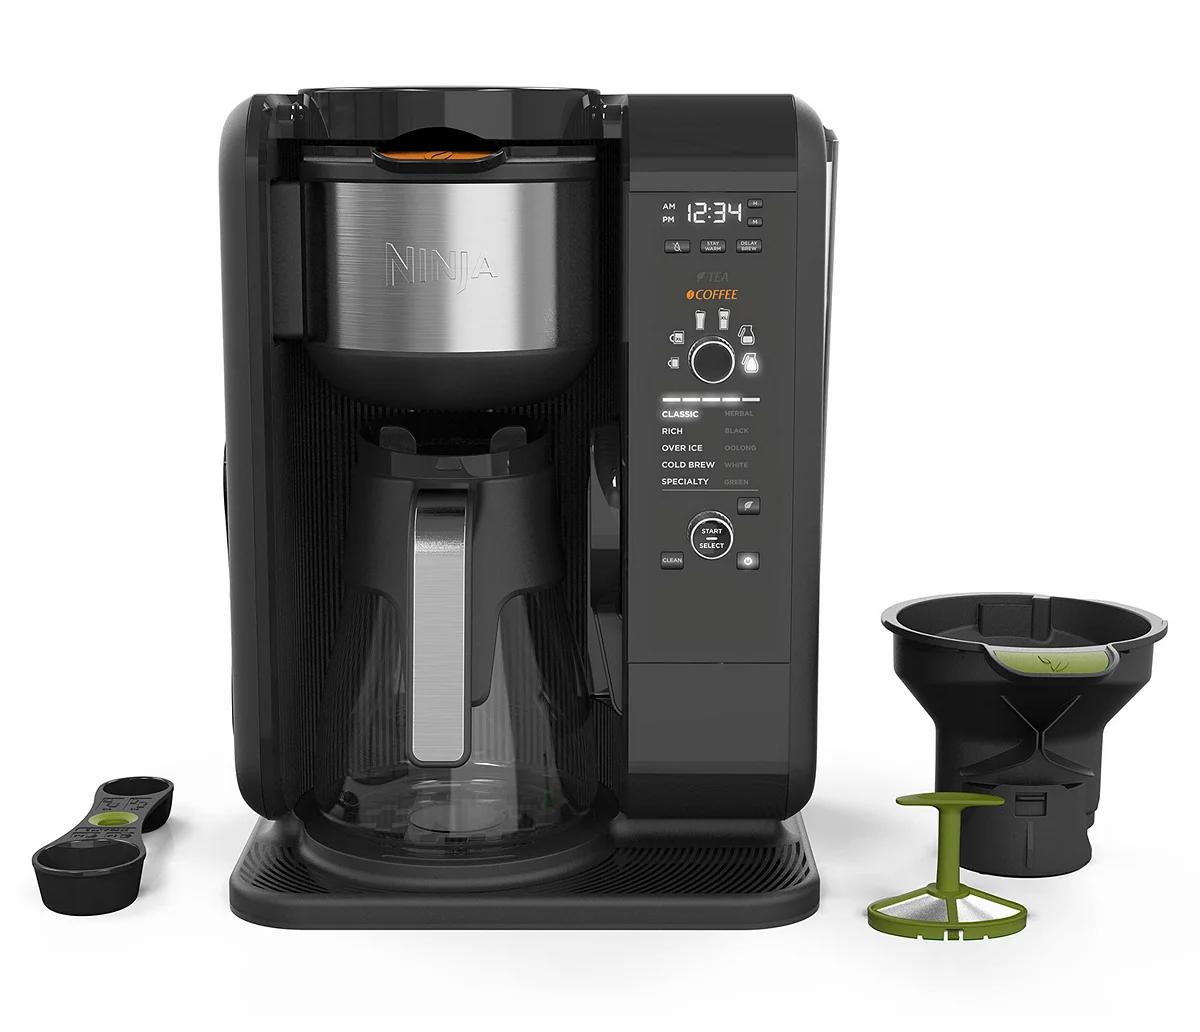 Ninja Hot and Cold Brewed System with $20 Kohls Cash for $127.99 Shipped